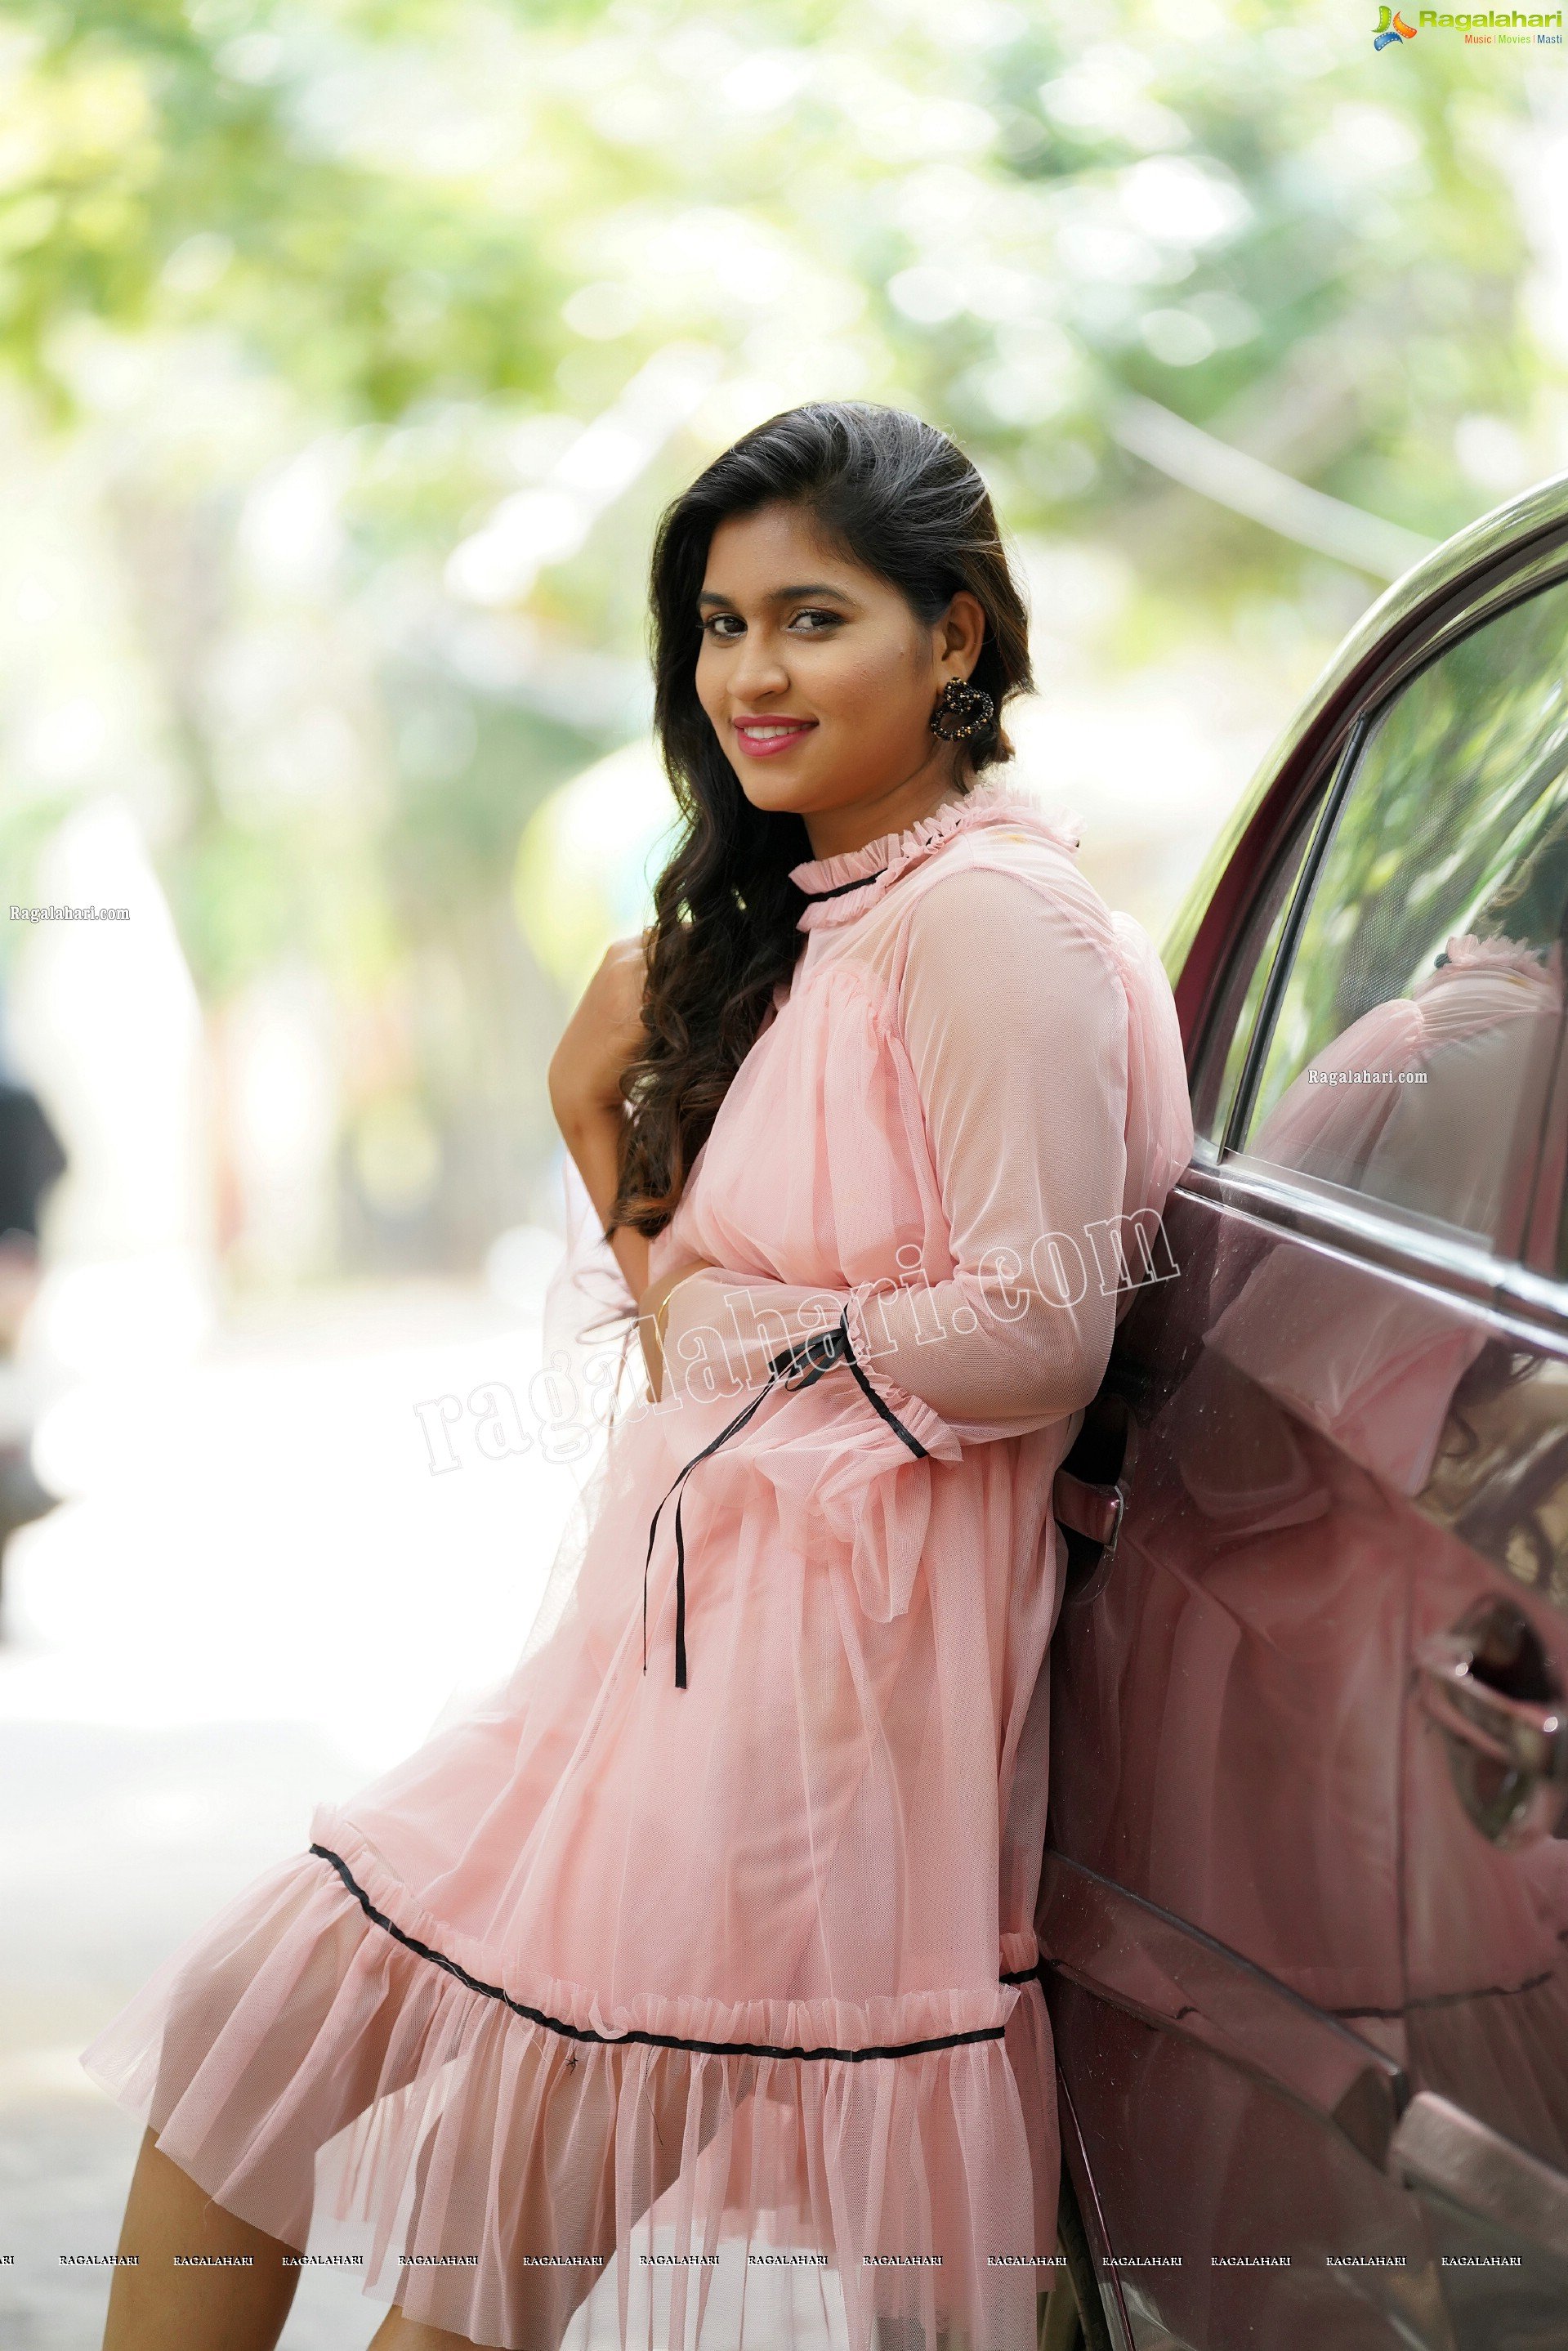 Honey Royal in Baby Pink Mini Frill Dress, Exclusive Photoshoot